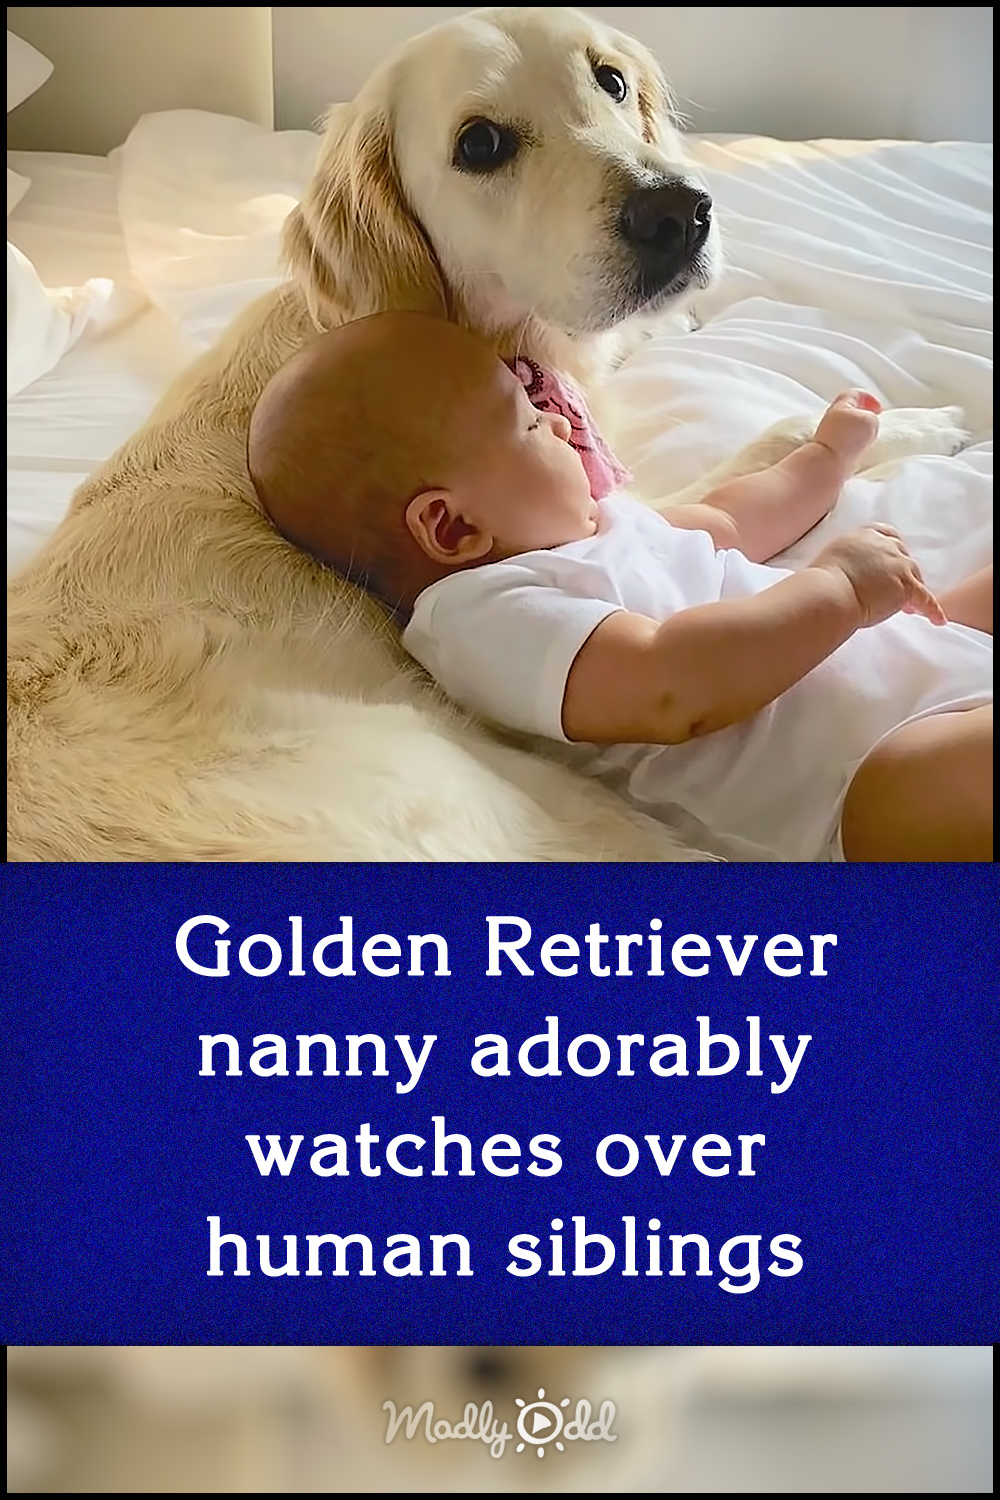 Golden Retriever nanny adorably watches over human siblings